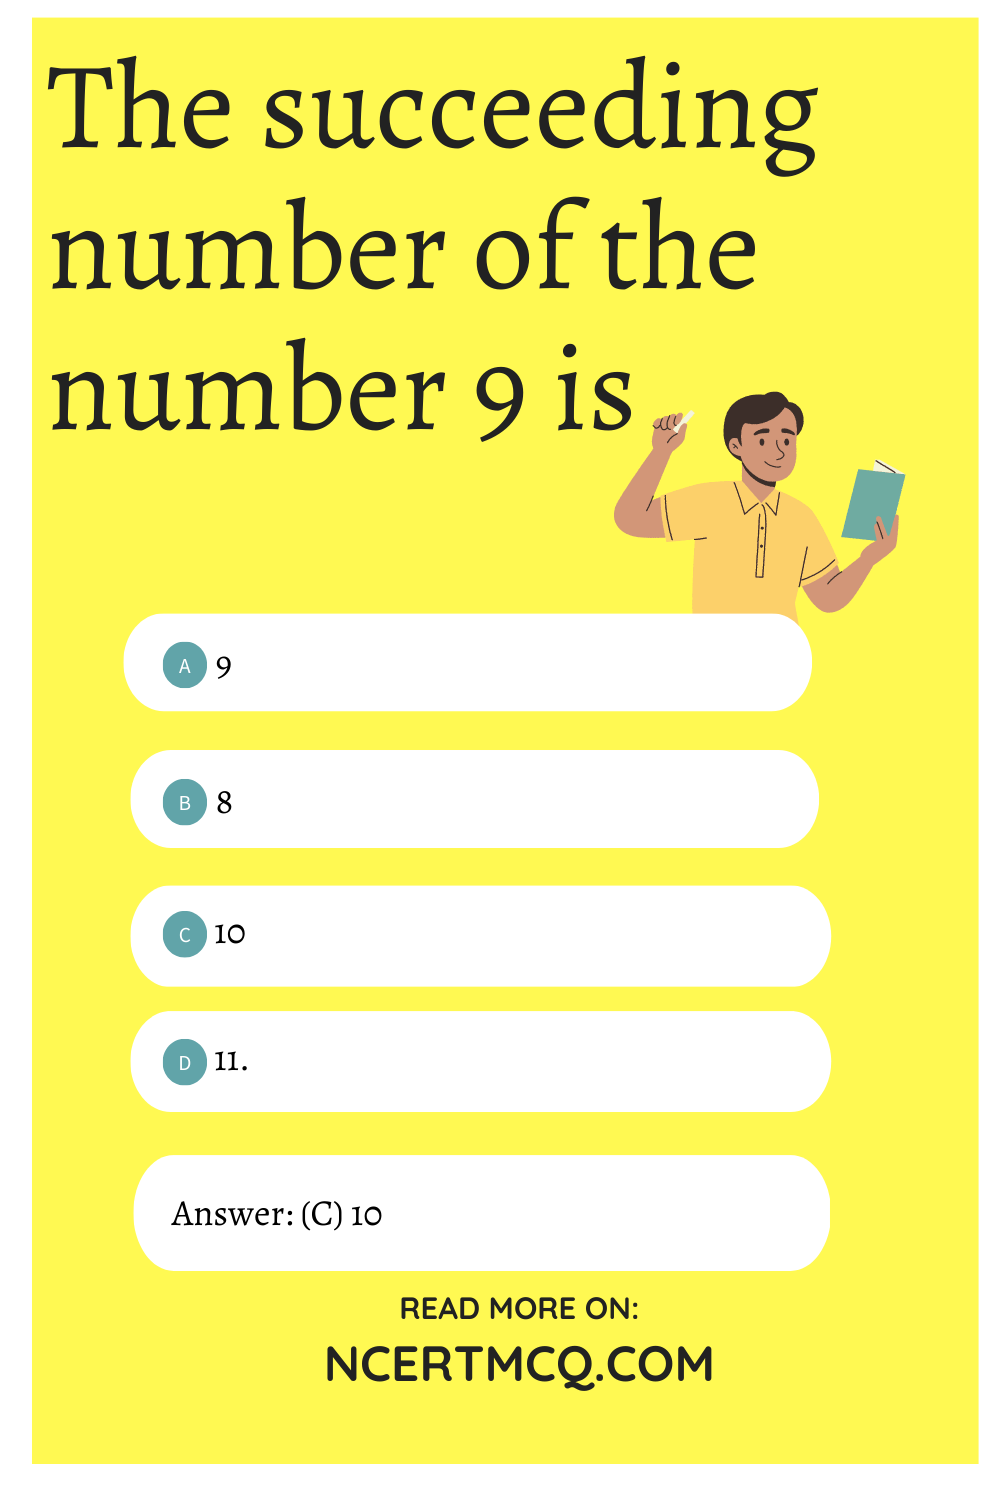 The succeeding number of the number 9 is